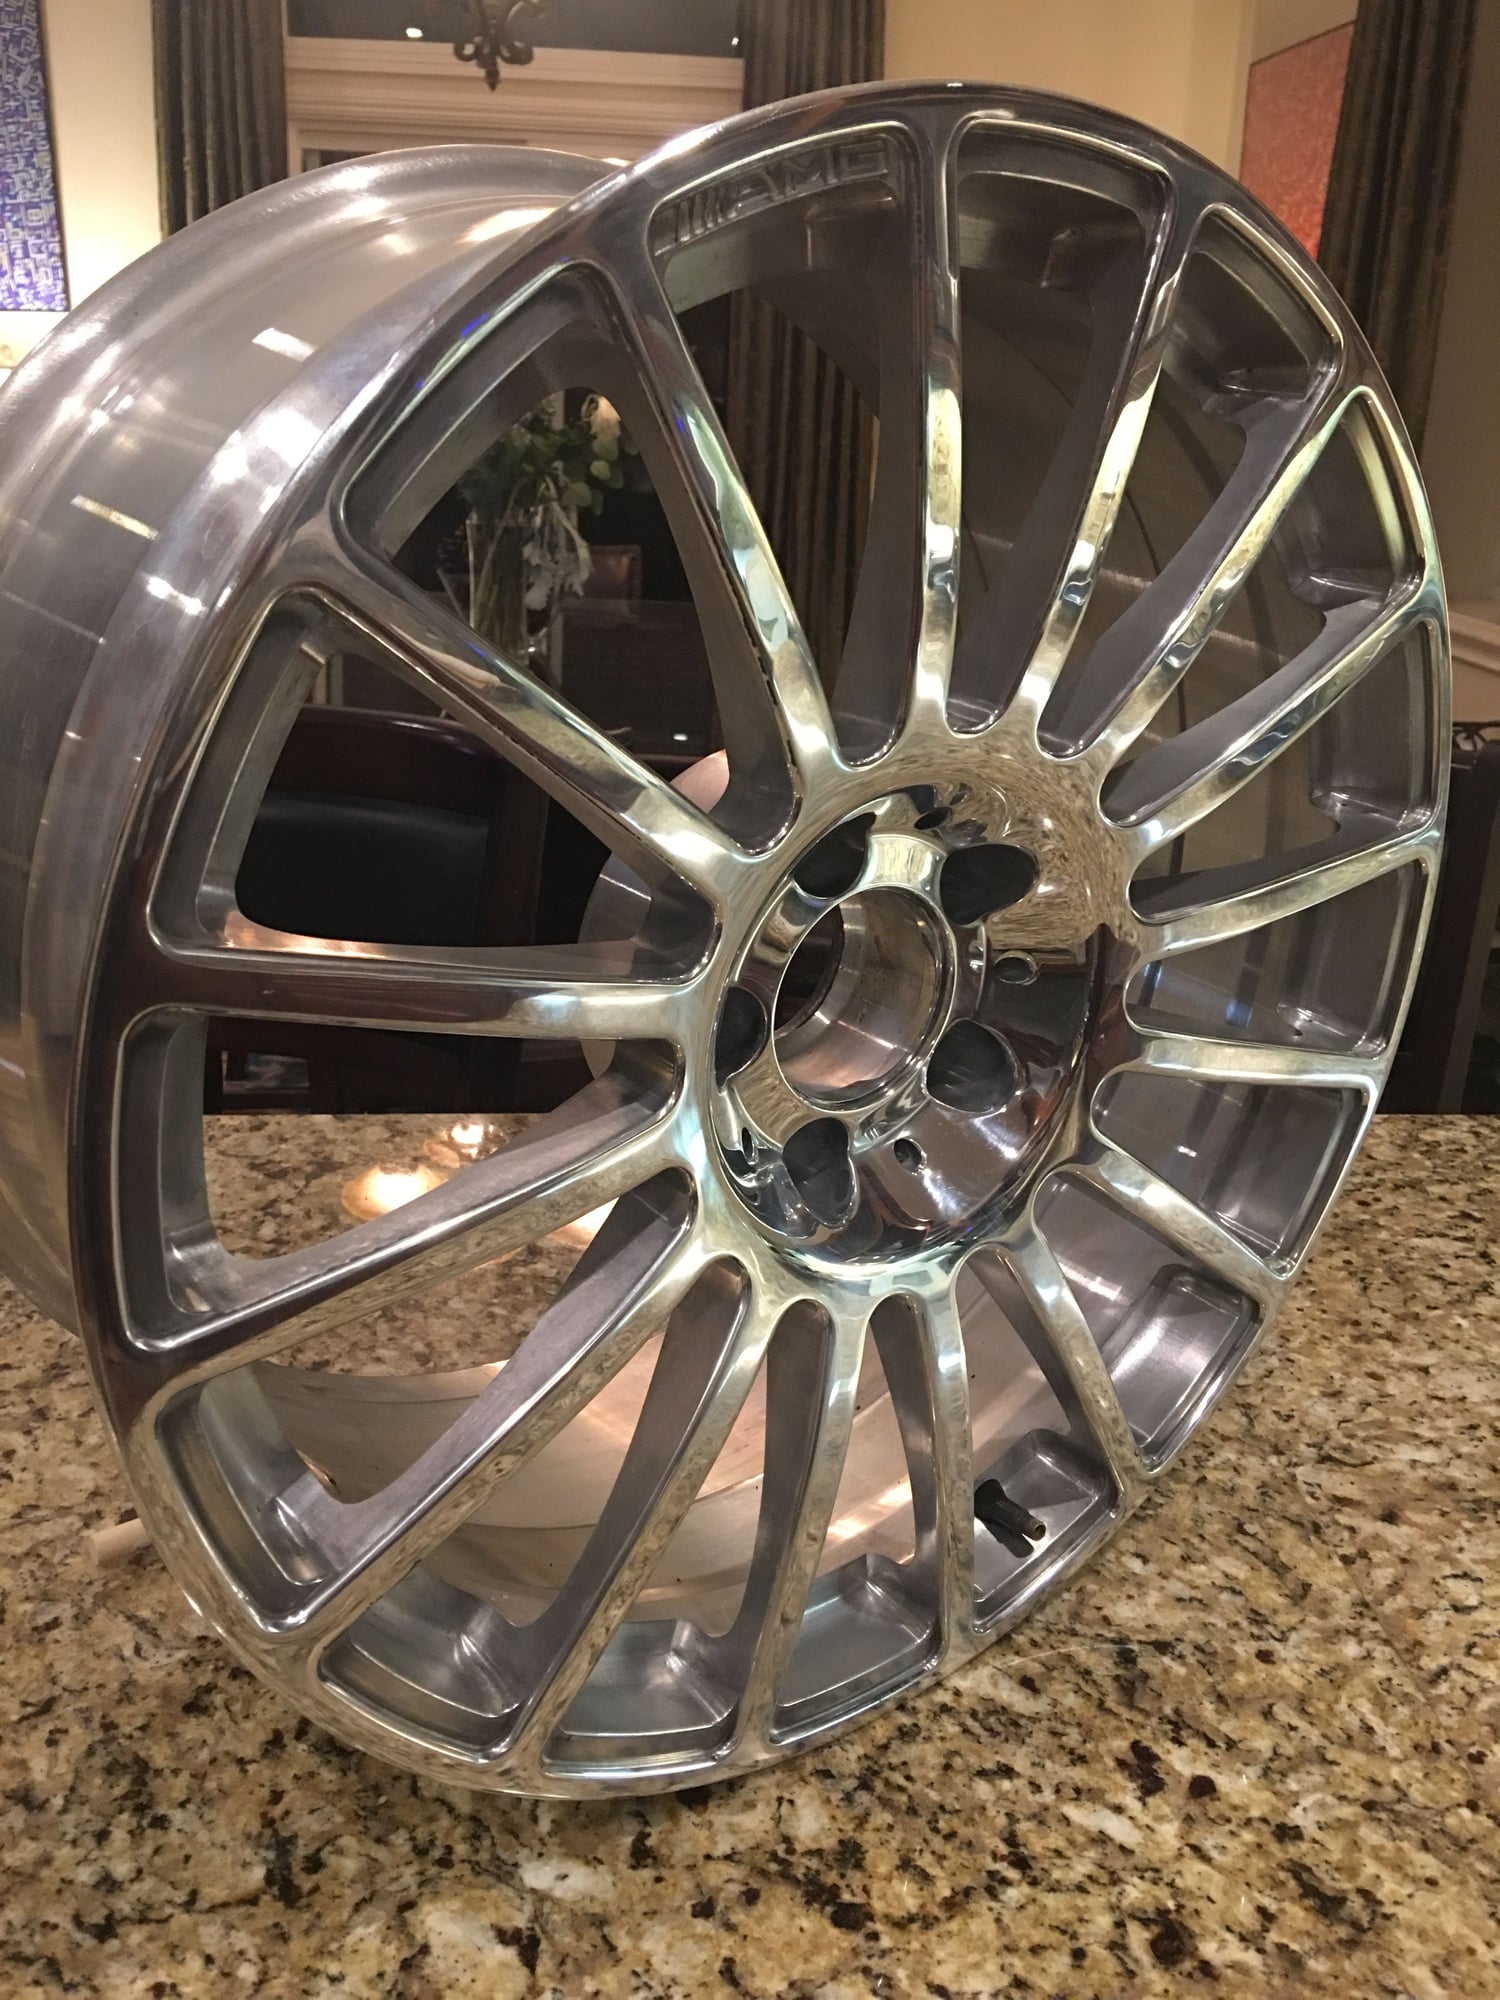 Wheels and Tires/Axles - AMG CLK63 Black Series 19" OEM AMG Front Wheel Rim - Used - 2008 to 2009 Mercedes-Benz CLK63 AMG - Redondo Beach, CA 90278, United States